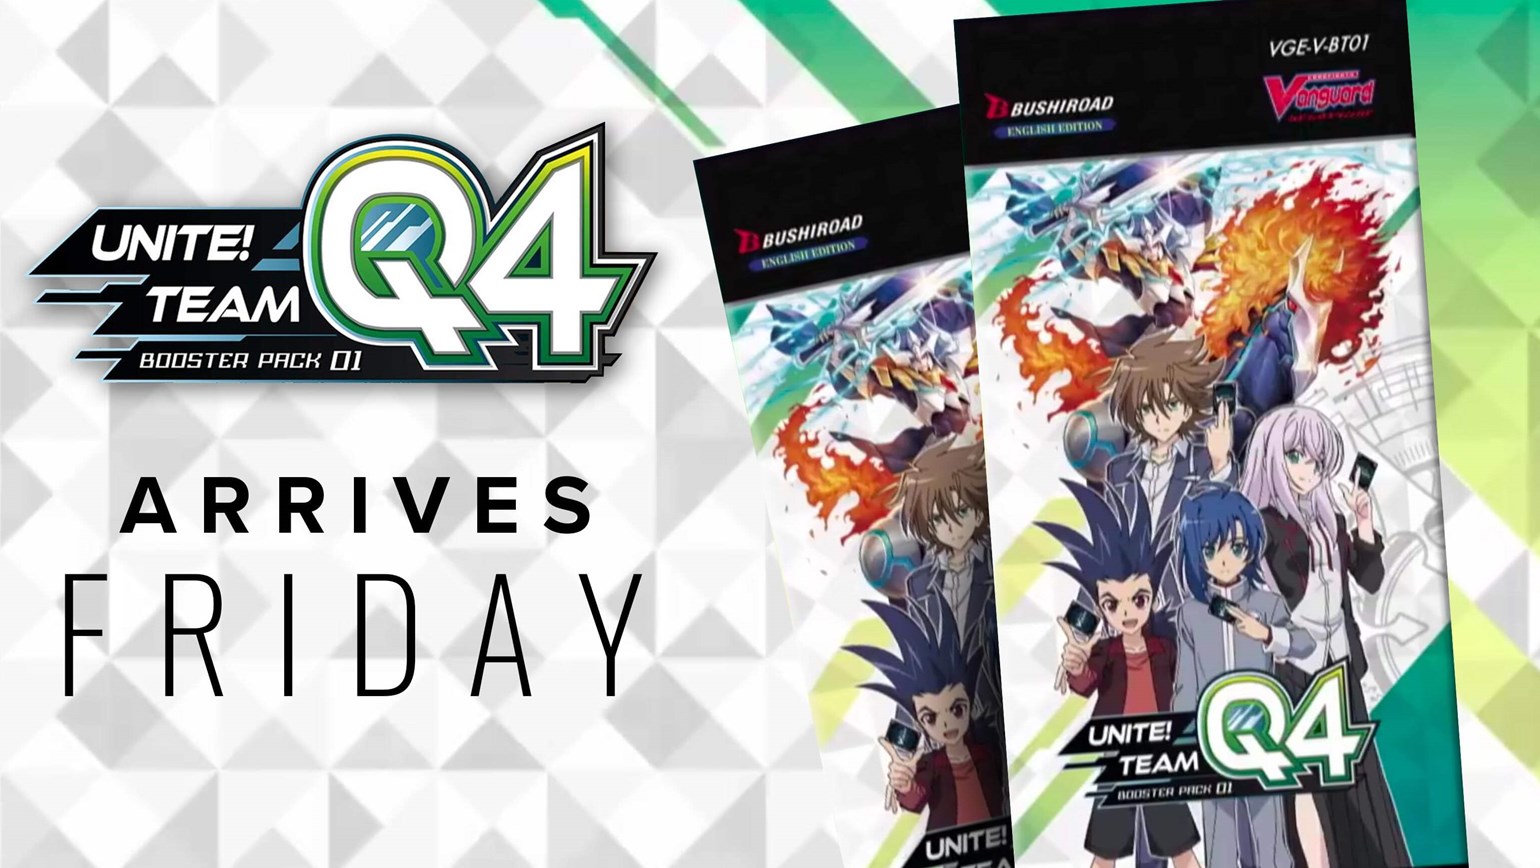 Cardfight!! Vanguard - Unite! Team Q4 Shakes Up Game with New Standard Format